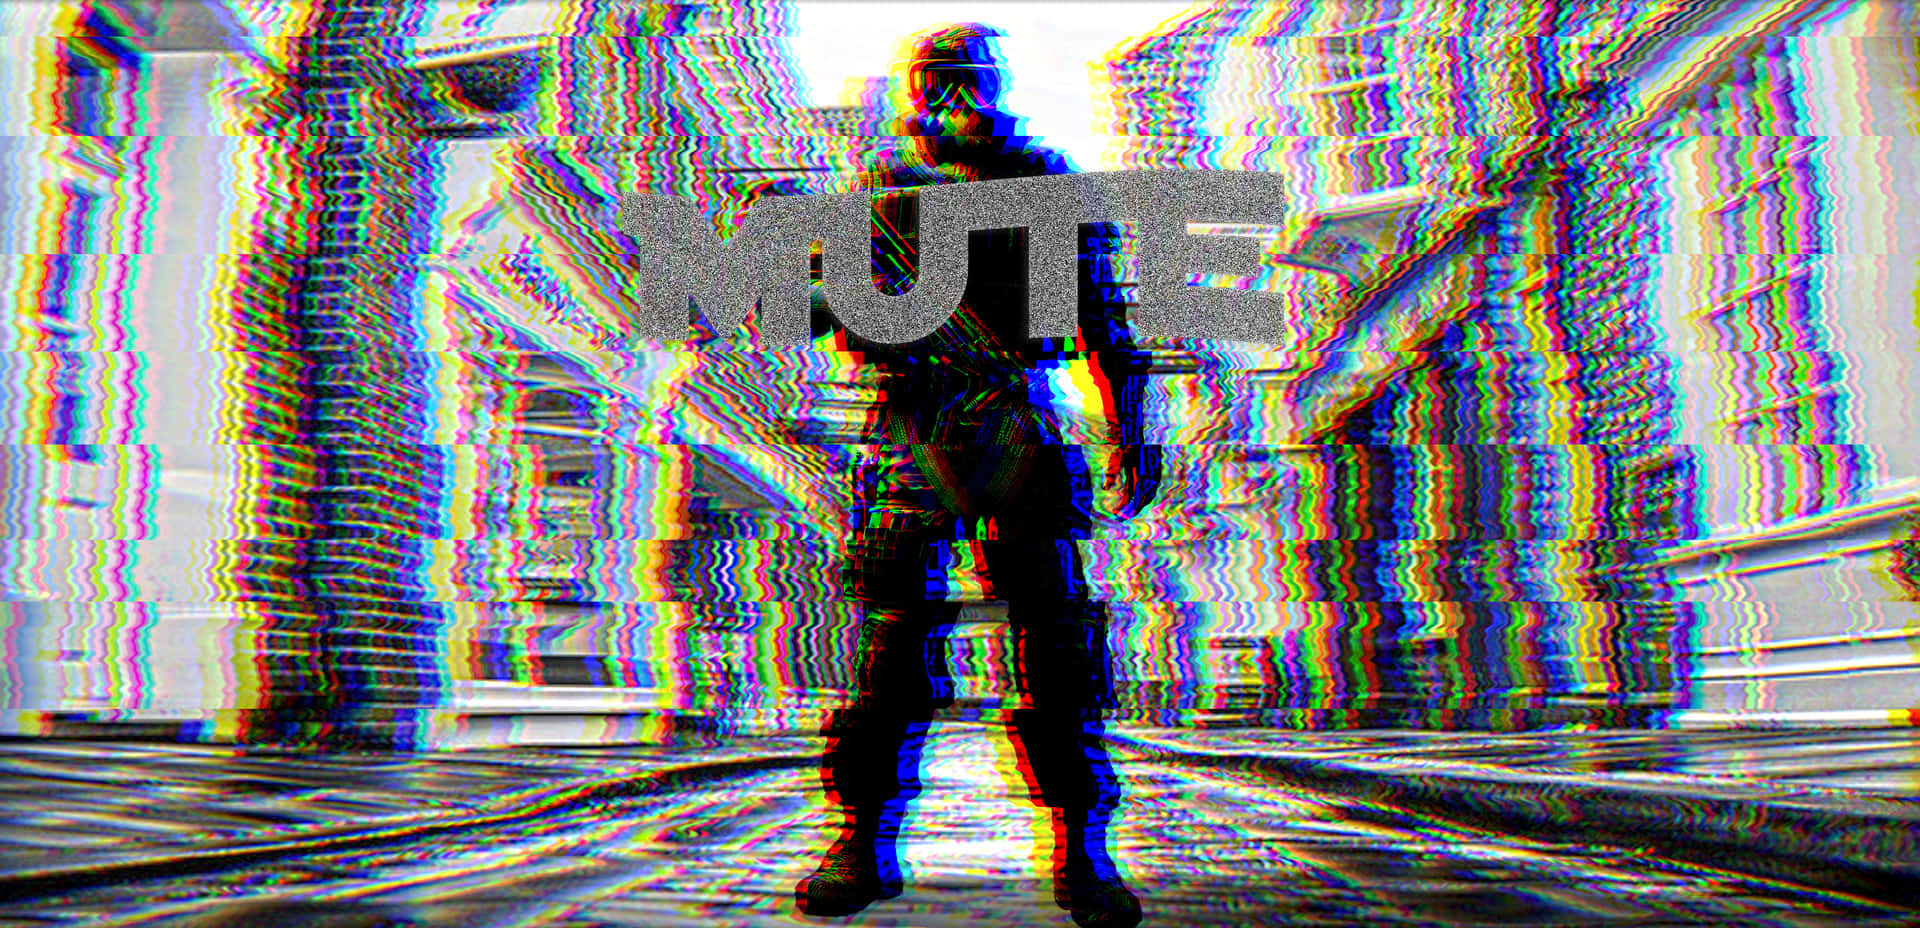 Mute Surrounded By Buildings [wallpaper] Wallpaper